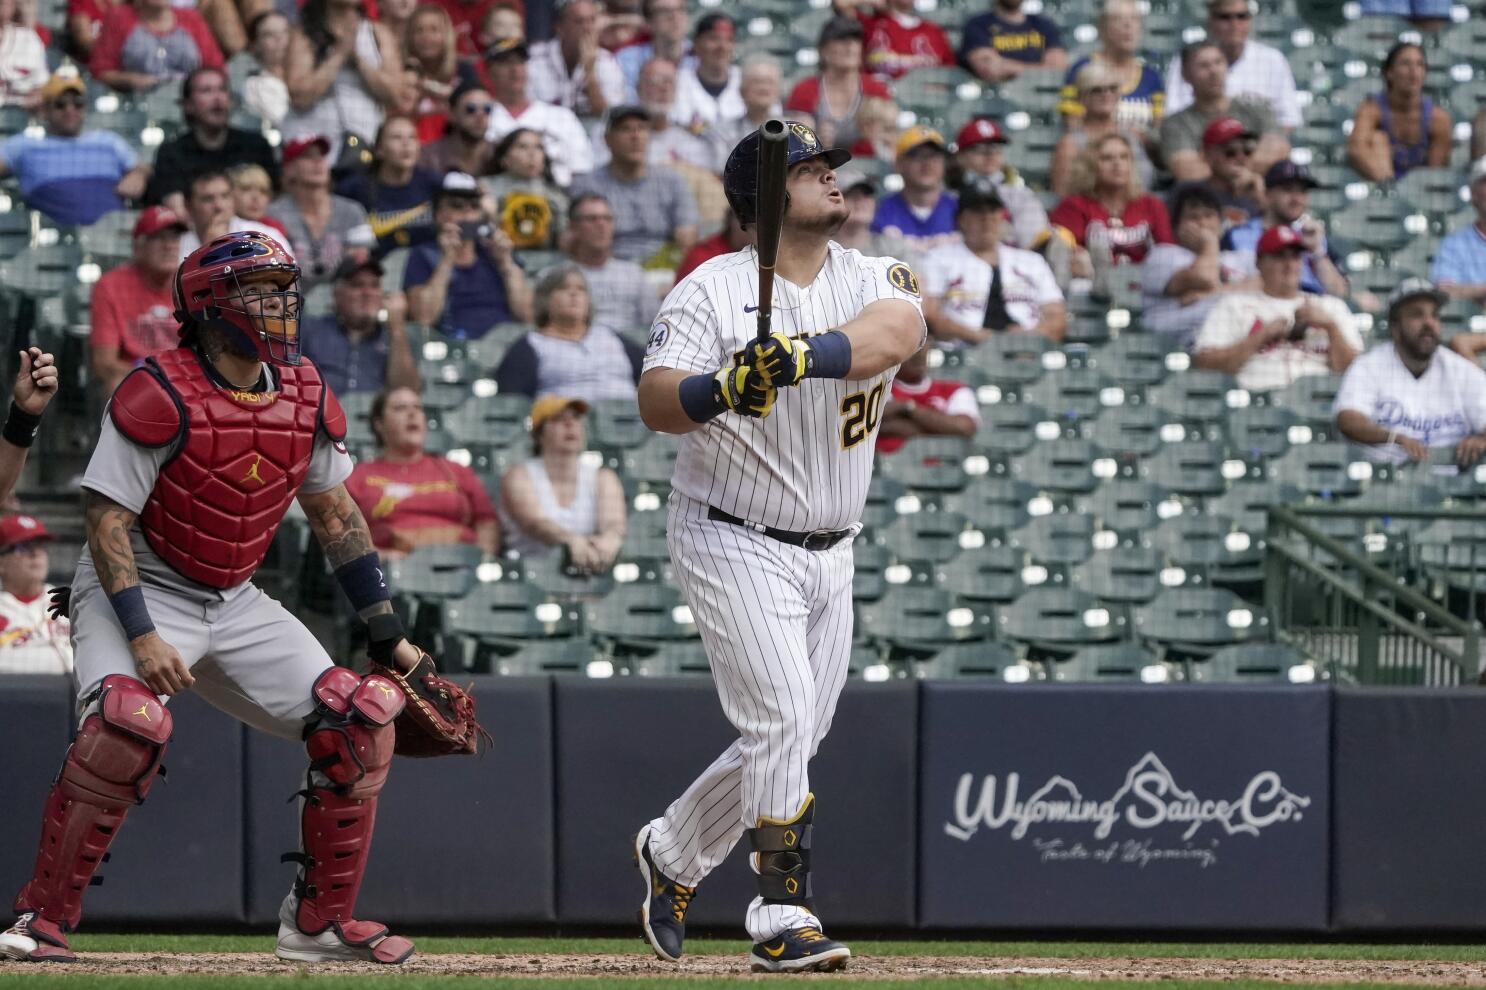 Santana's 3-run homer in the 7th leads Brewers past Rangers in matchup of  division leaders